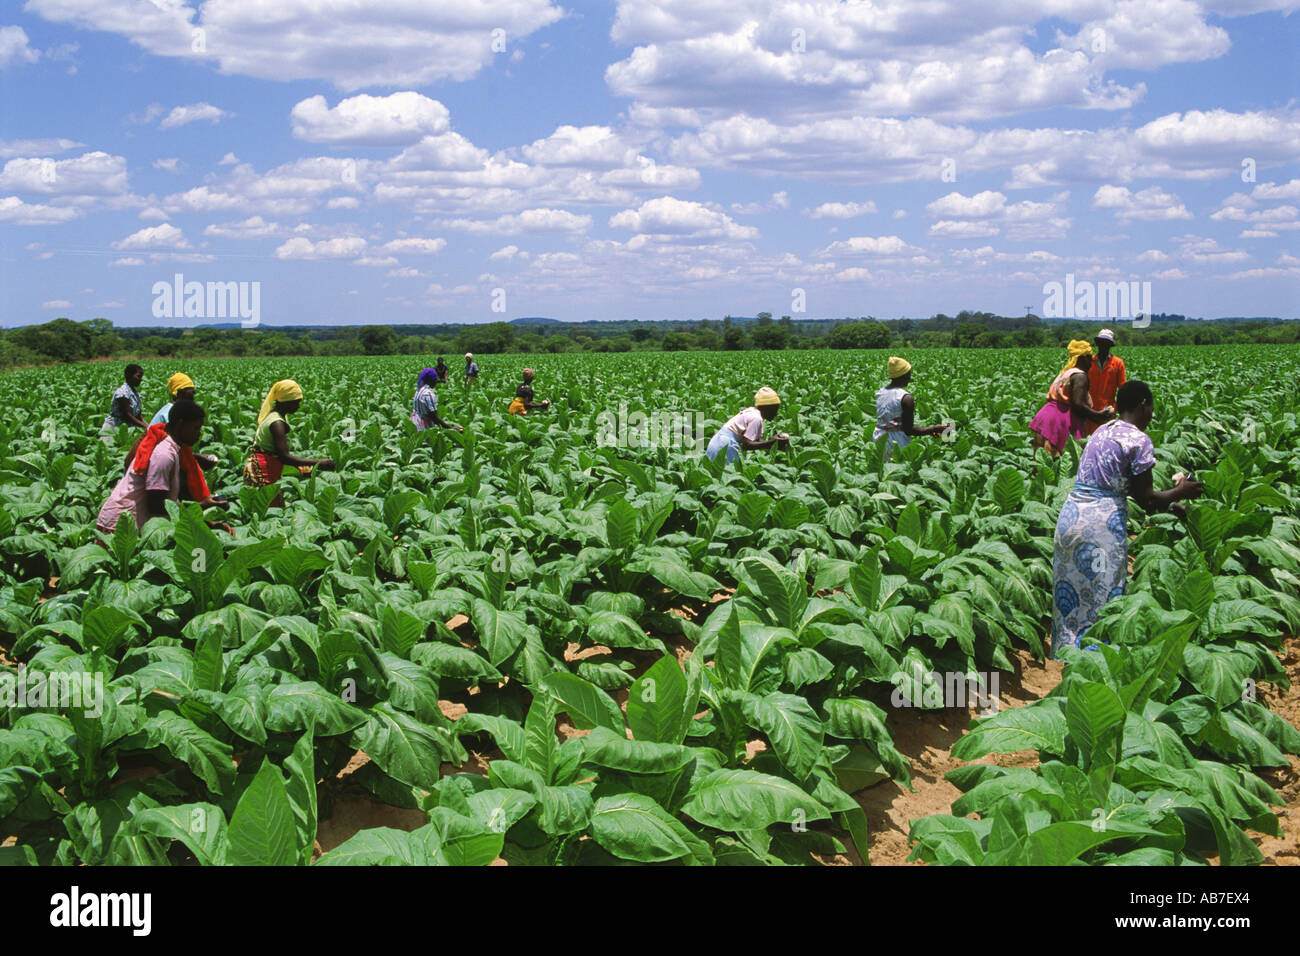 African women amid rows of tobacco plants on plantation in Zimbabwe Stock Photo